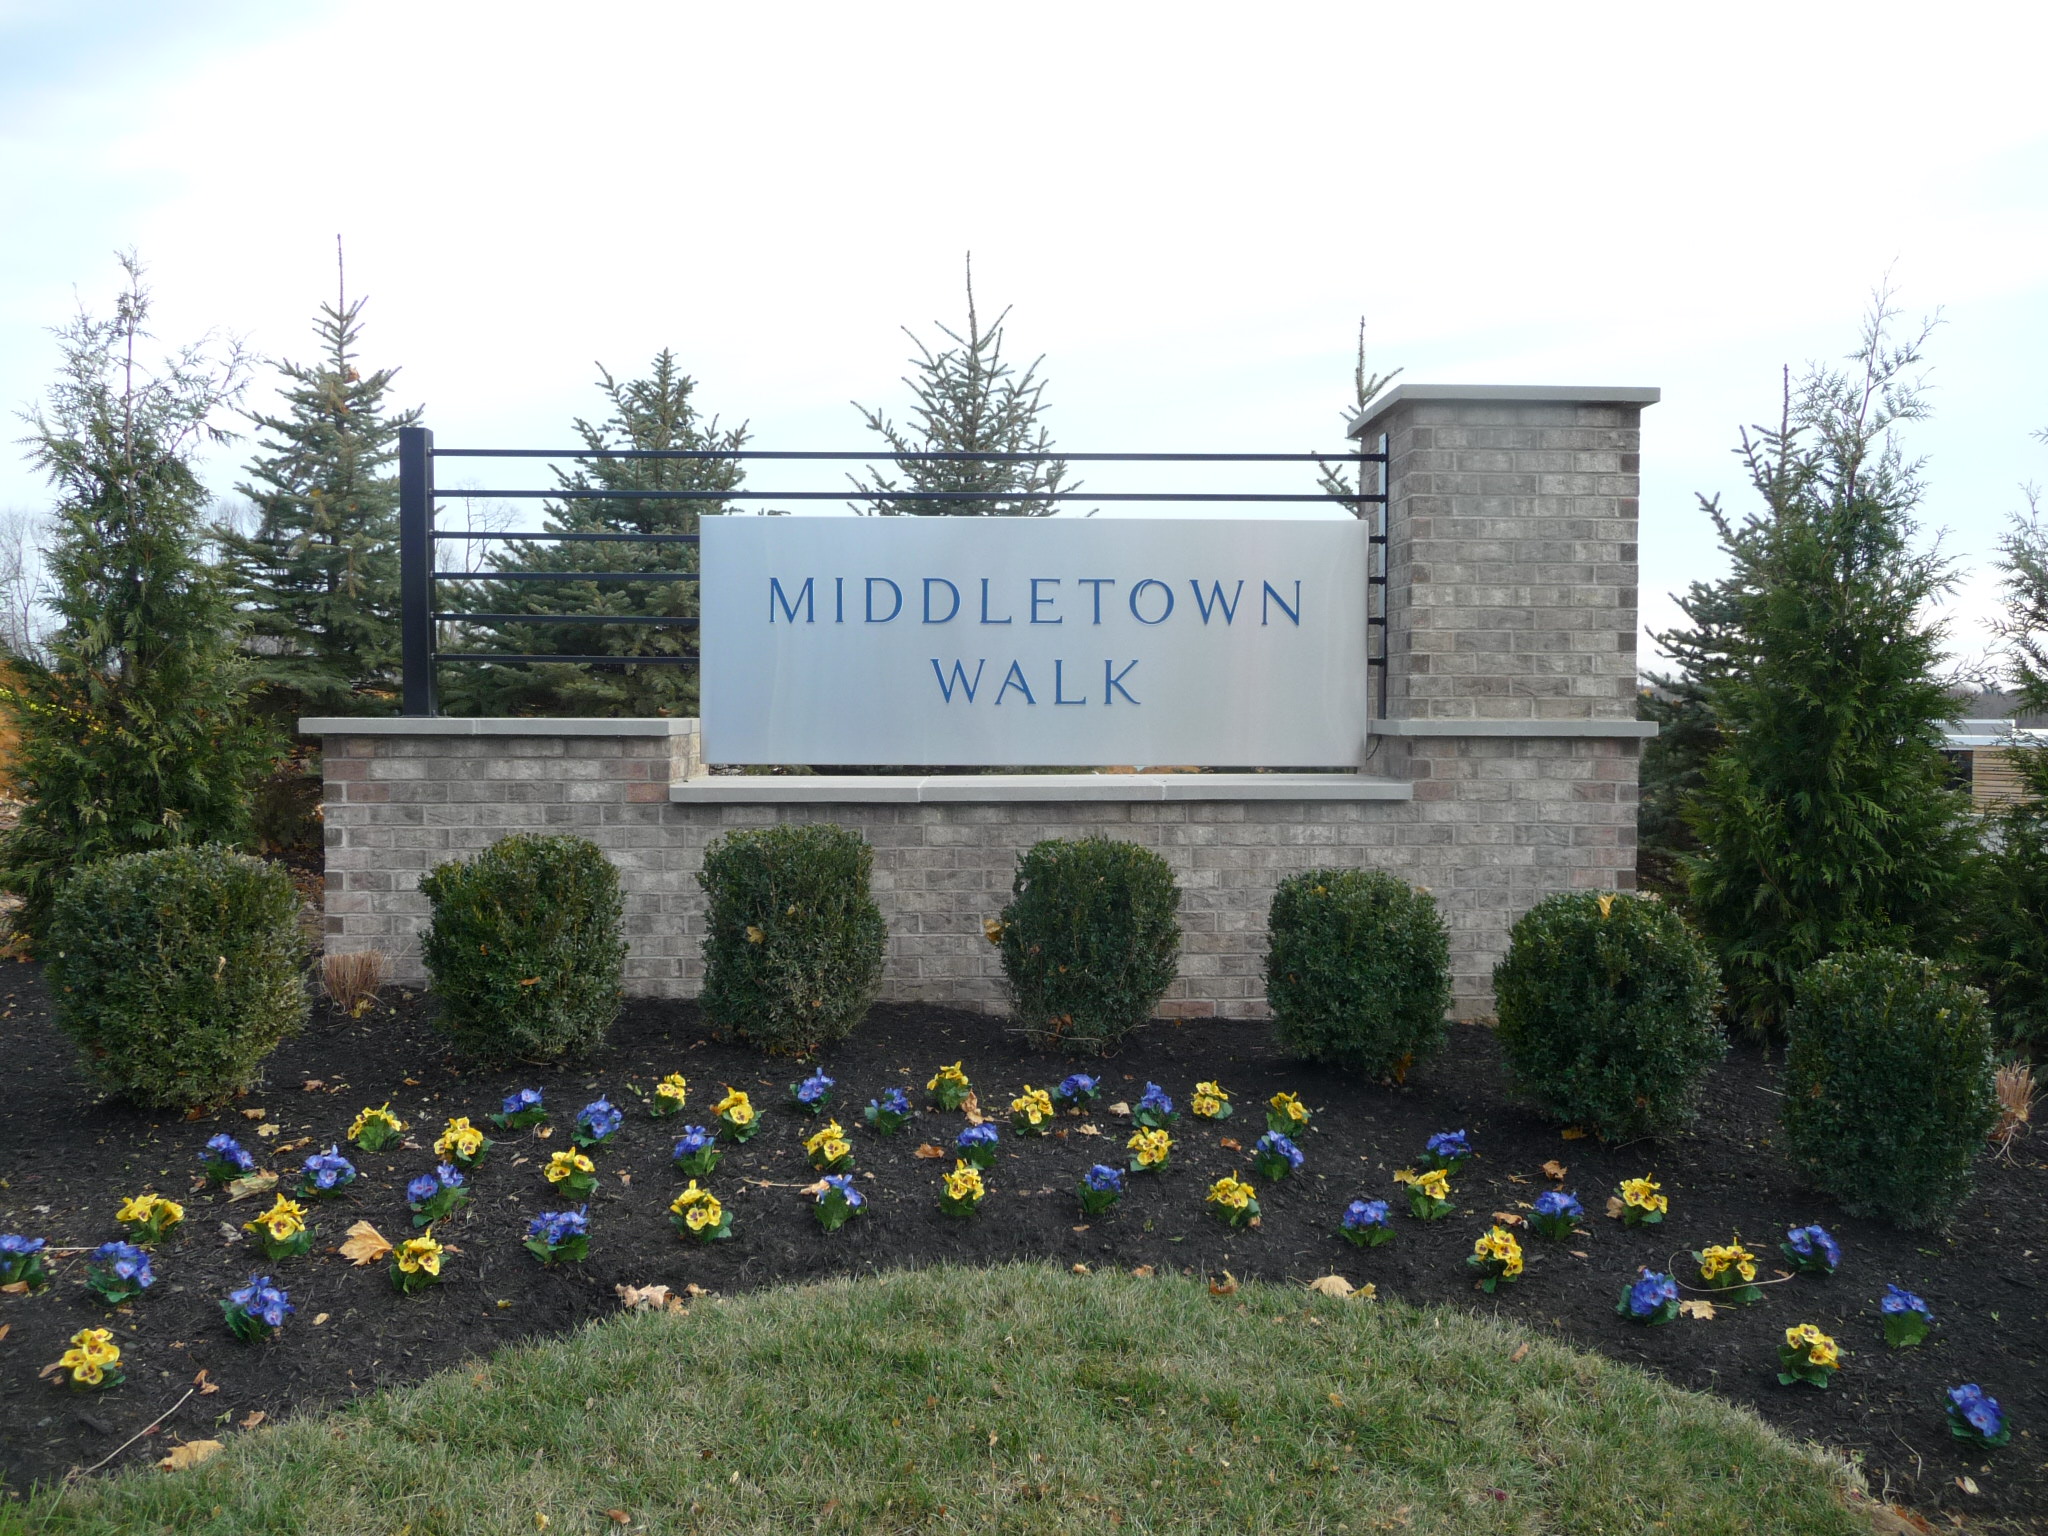 The entrance to Middletown Walk in Middletown NJ